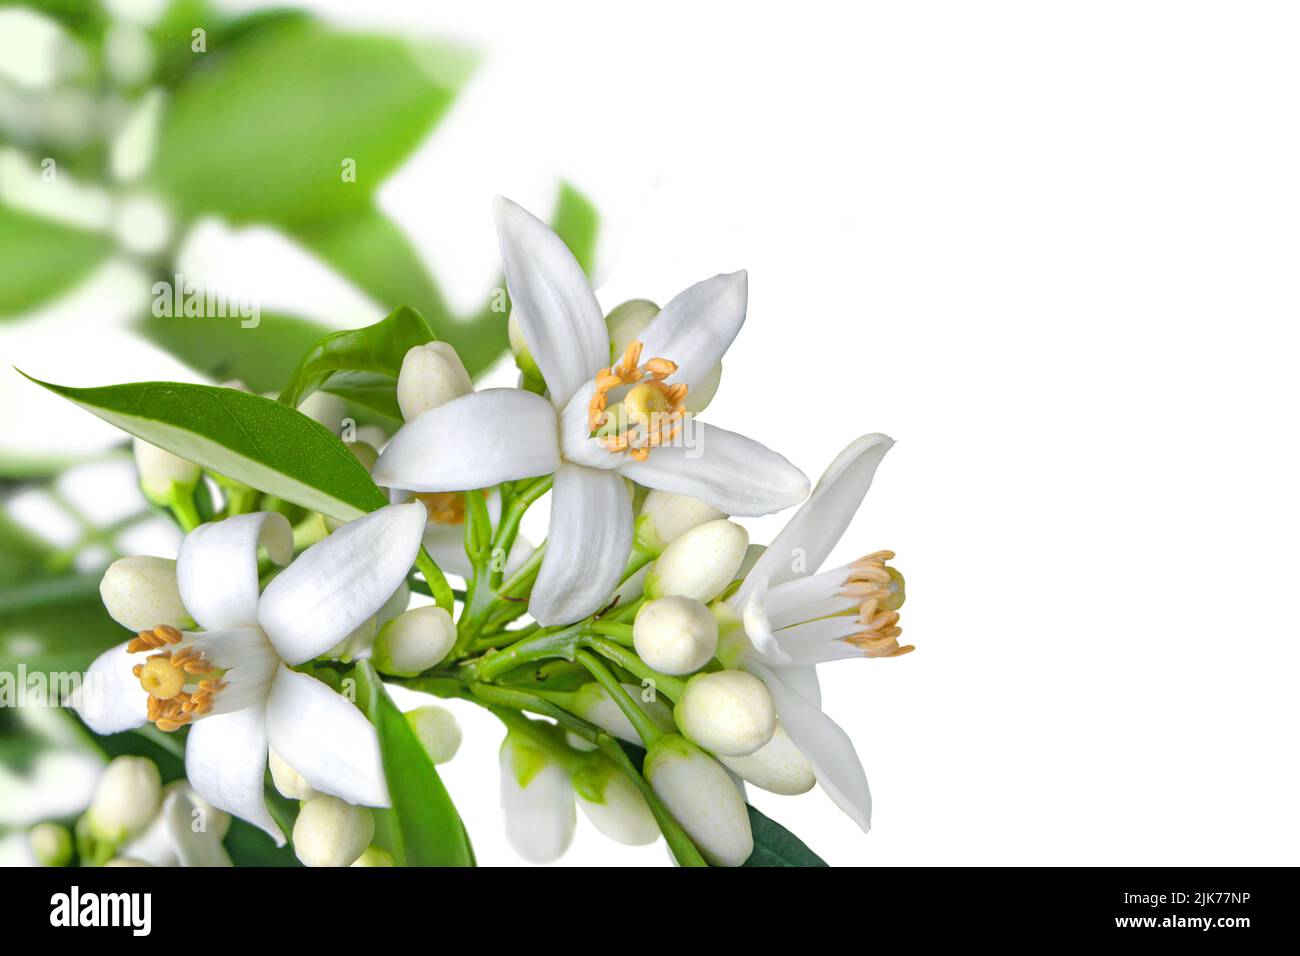 Orange blossom branch with flowers, buds and leaves in the corner isolated on white. Neroli citrus white bloom. Stock Photo